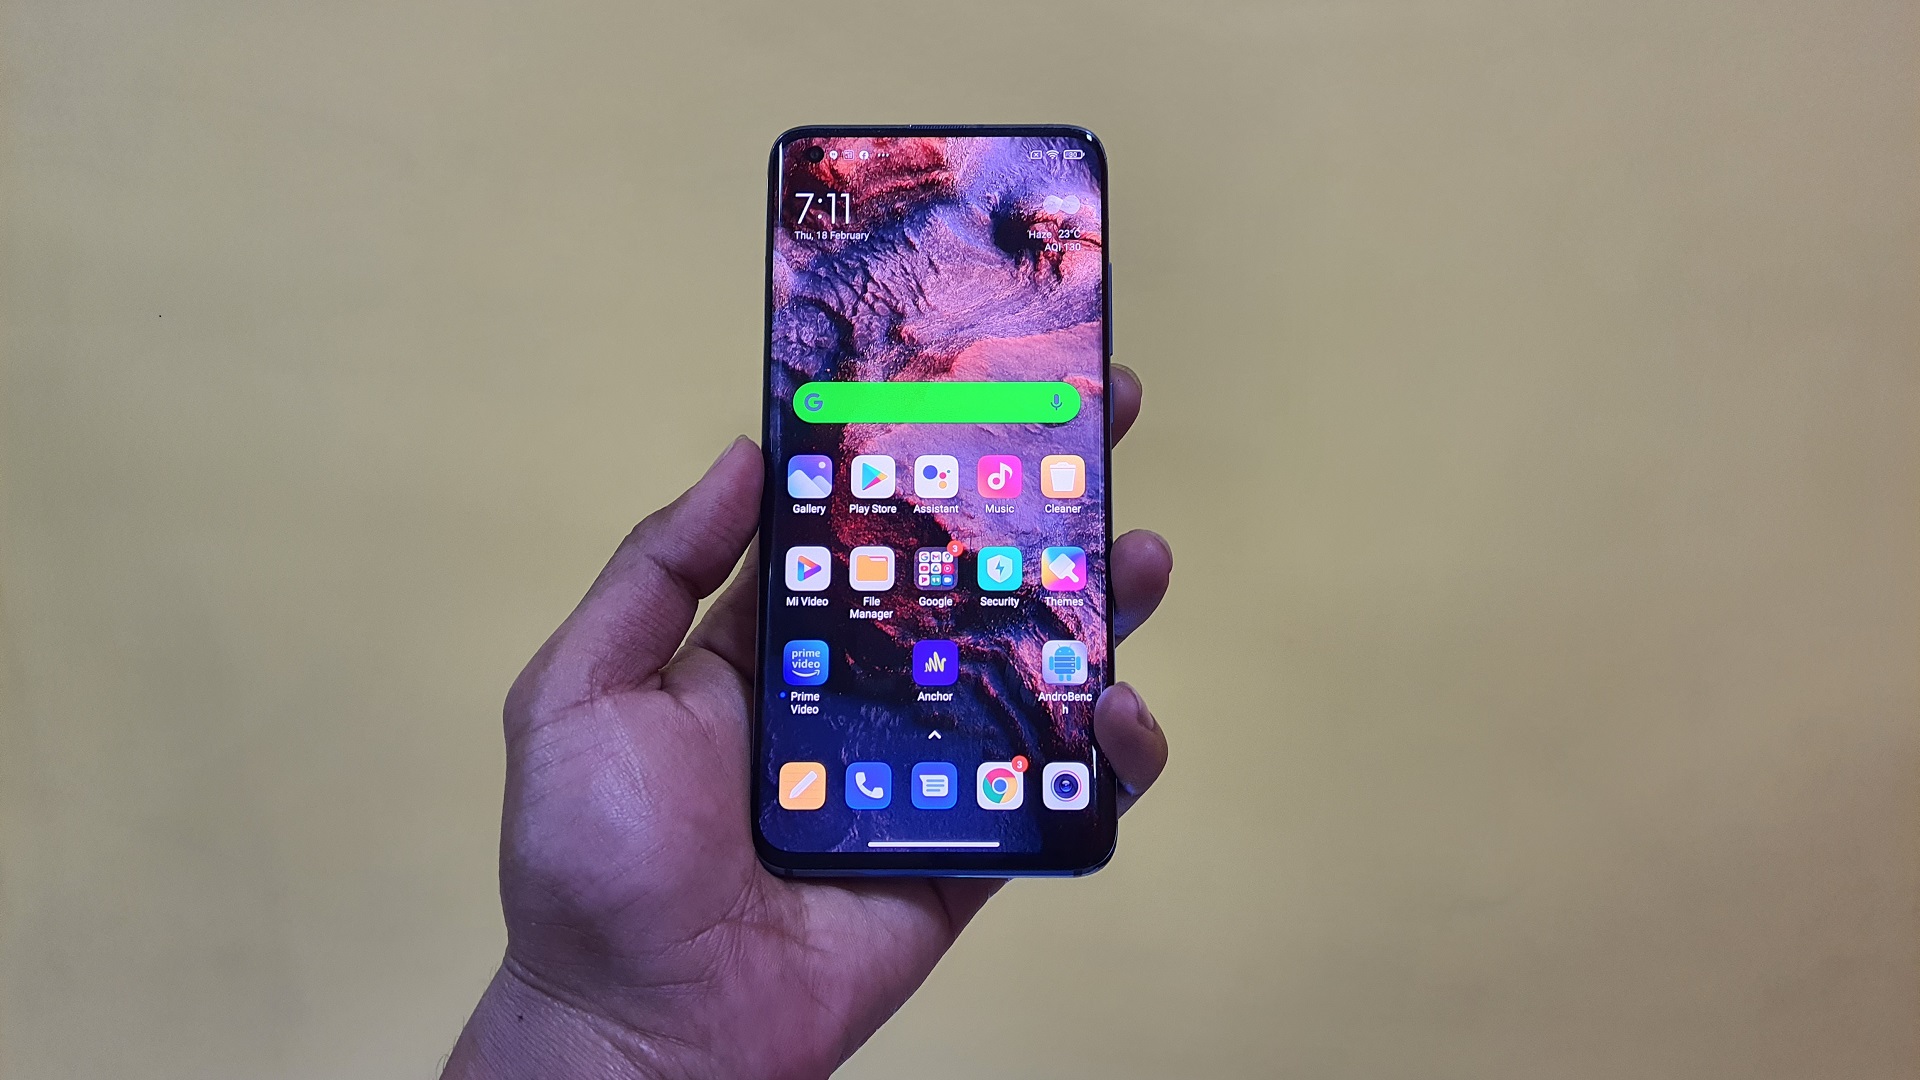 Fix MIUI 12 Bug That Makes Icons Disappear From Home Screen